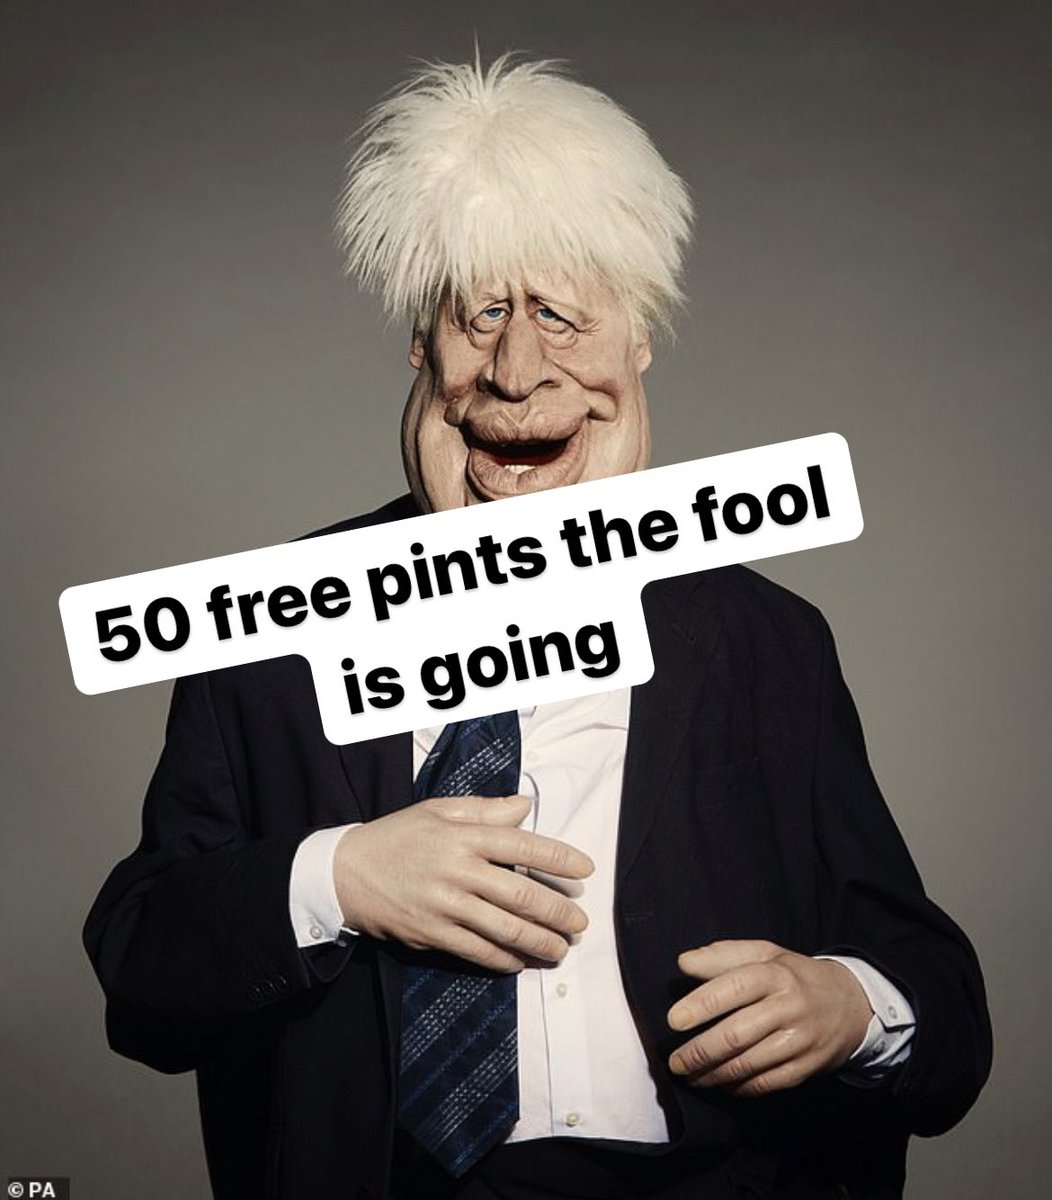 We are giving away 50 pints  to celebrate the fool leaving (one per person) from 7pm tonight
About time.
Any way drink responsibility.
Most important vote,
Fund the NHS,
Discuss issues even if you don’t agree let’s have a beer. 
#ByeBoris